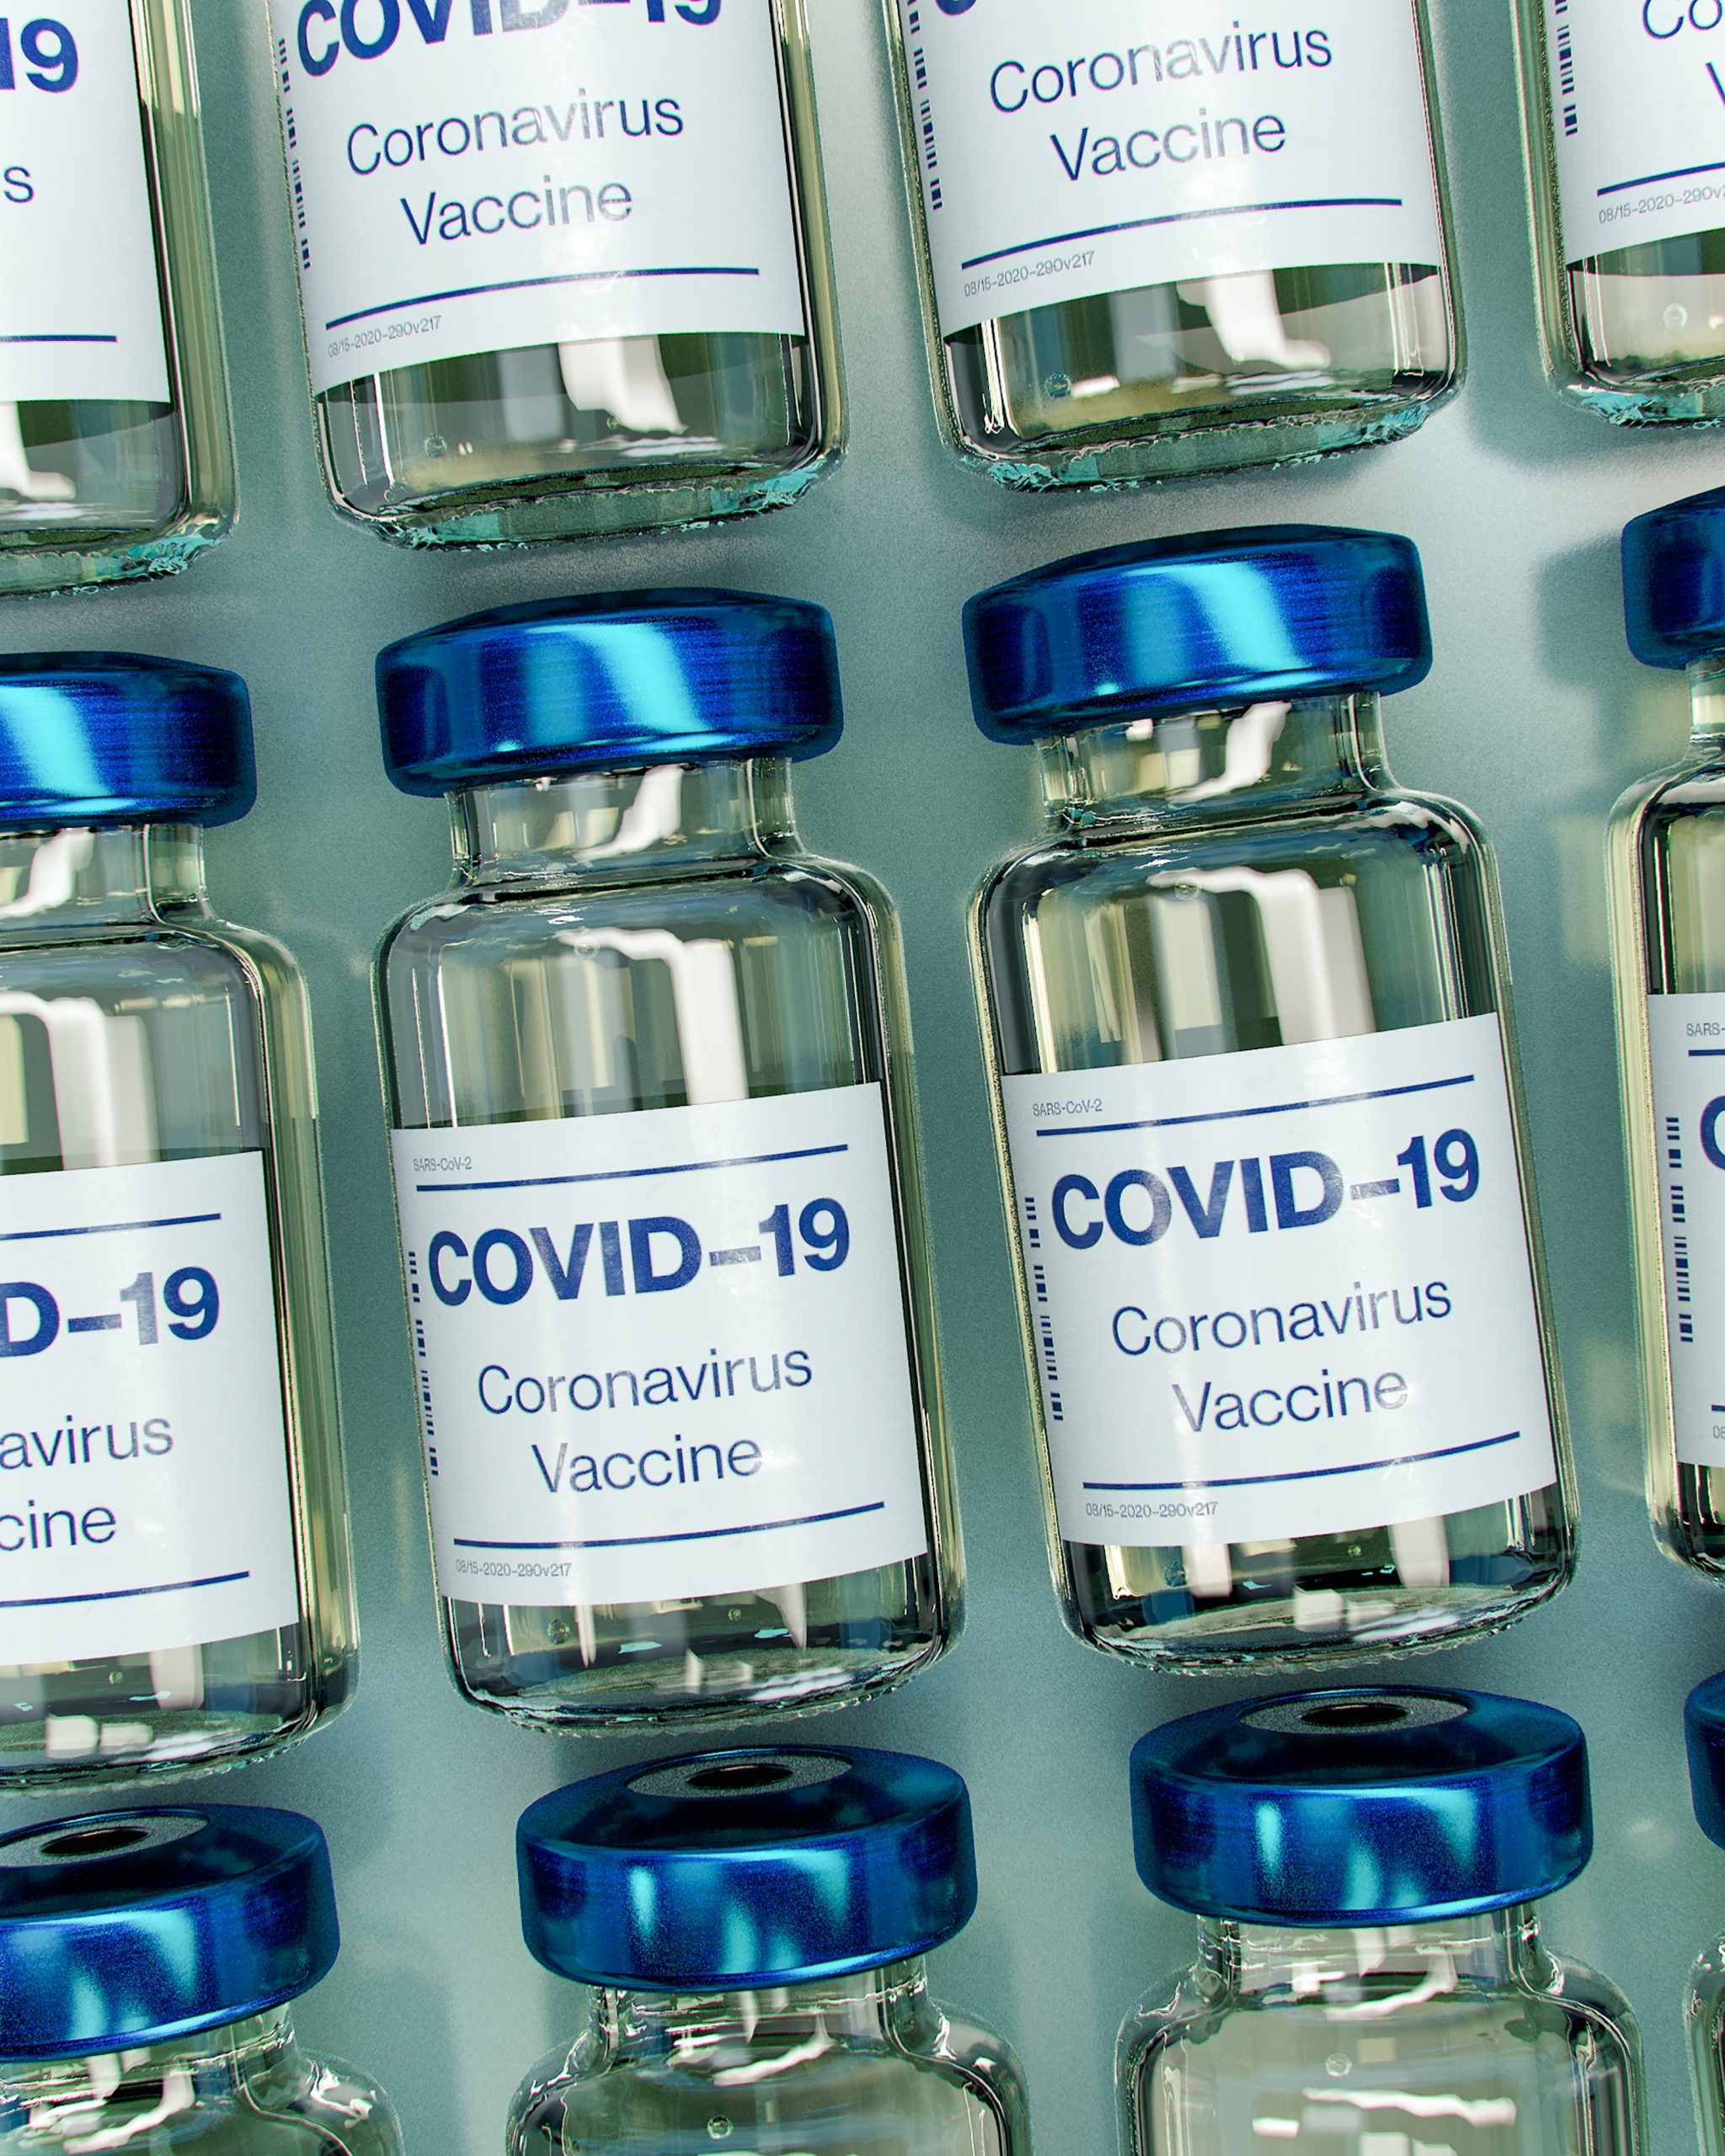 US FDA suggests Novavax COVID-19 vaccine linked to heart inflammation risk